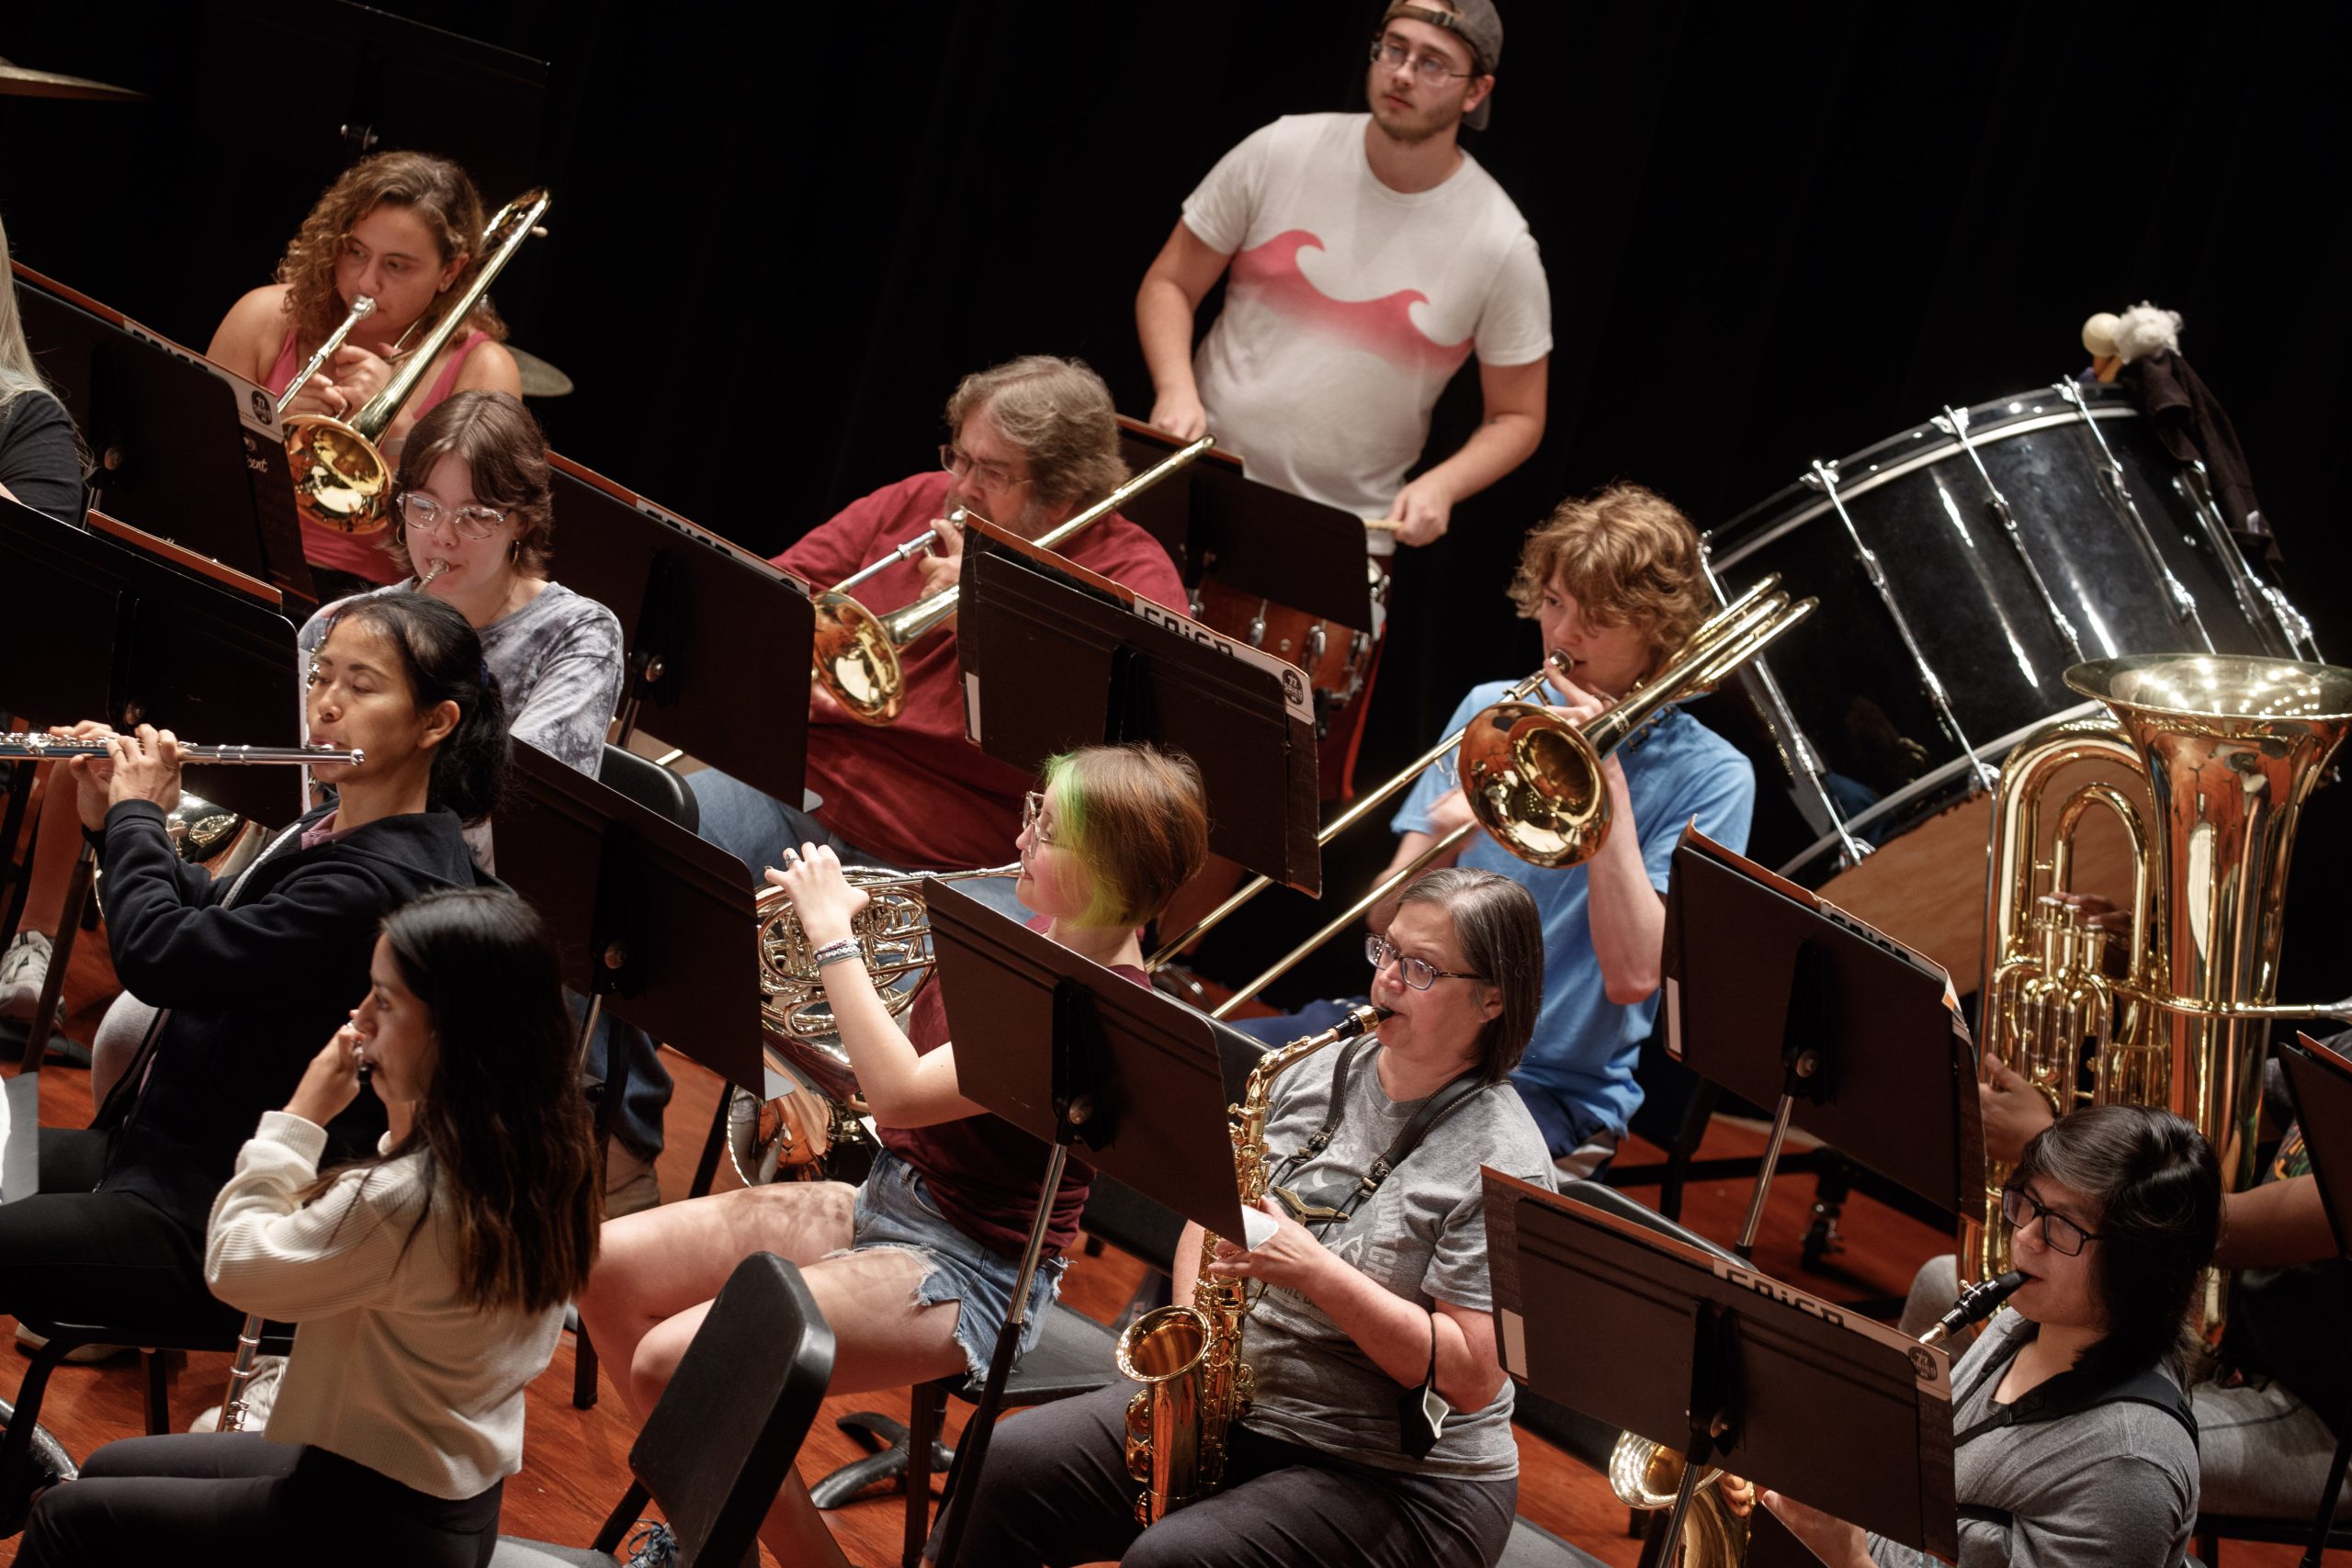 Students play a number of instruments as they look at sheet music on a stage.